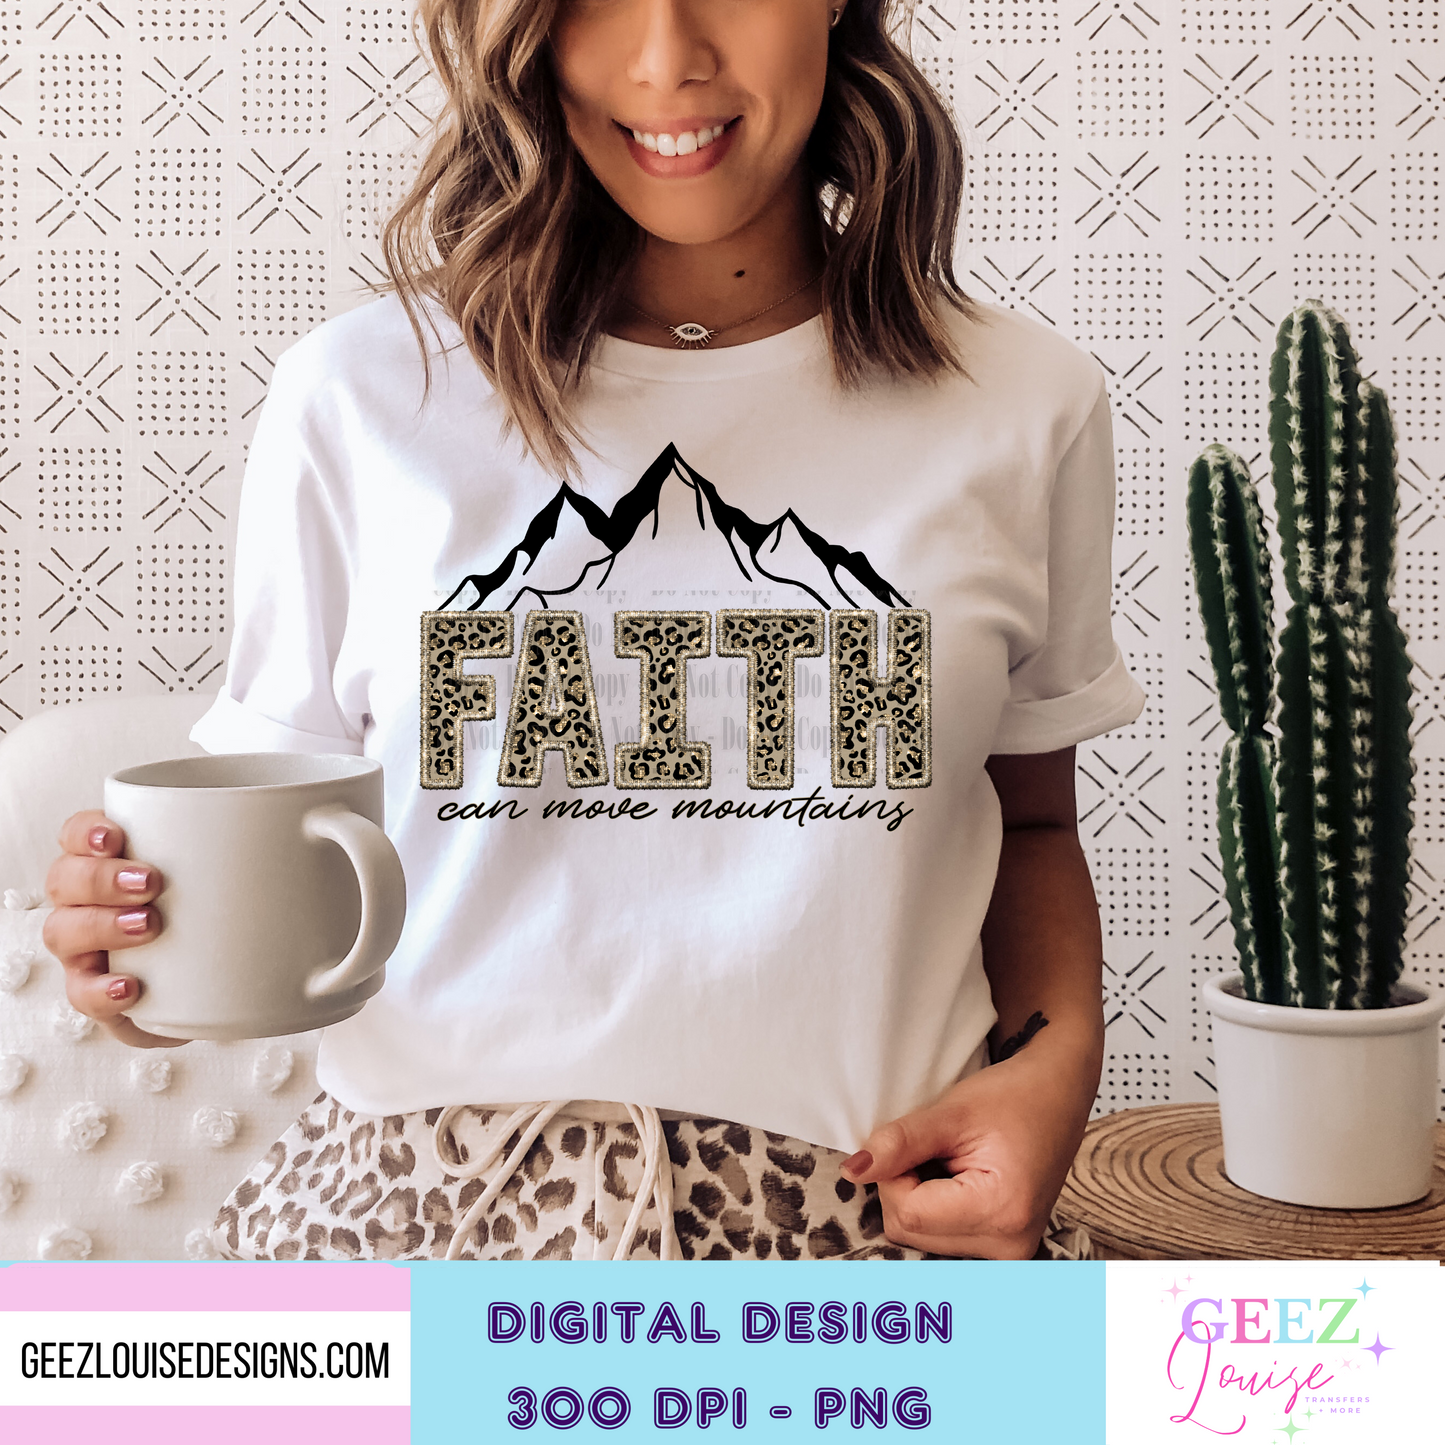 Faith can move mountains - faux embroidery - Digital Download- PNG